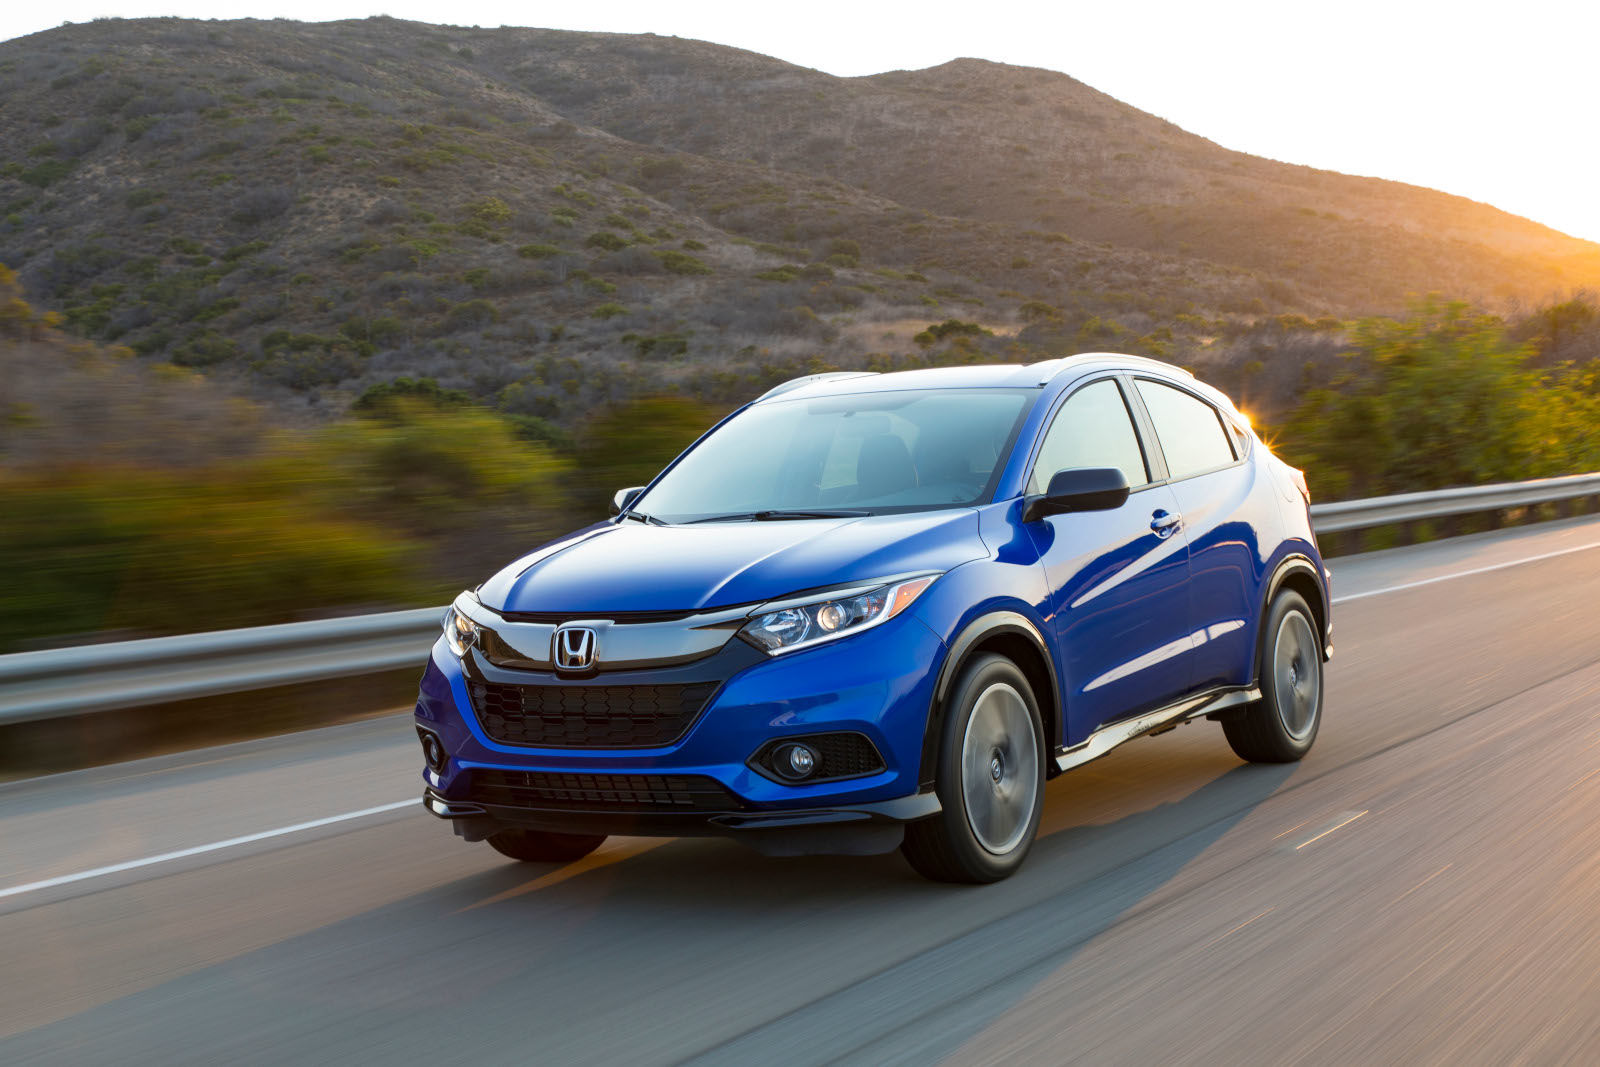 5 Reasons the Pre-Owned Honda HR-V is a Smart Buy